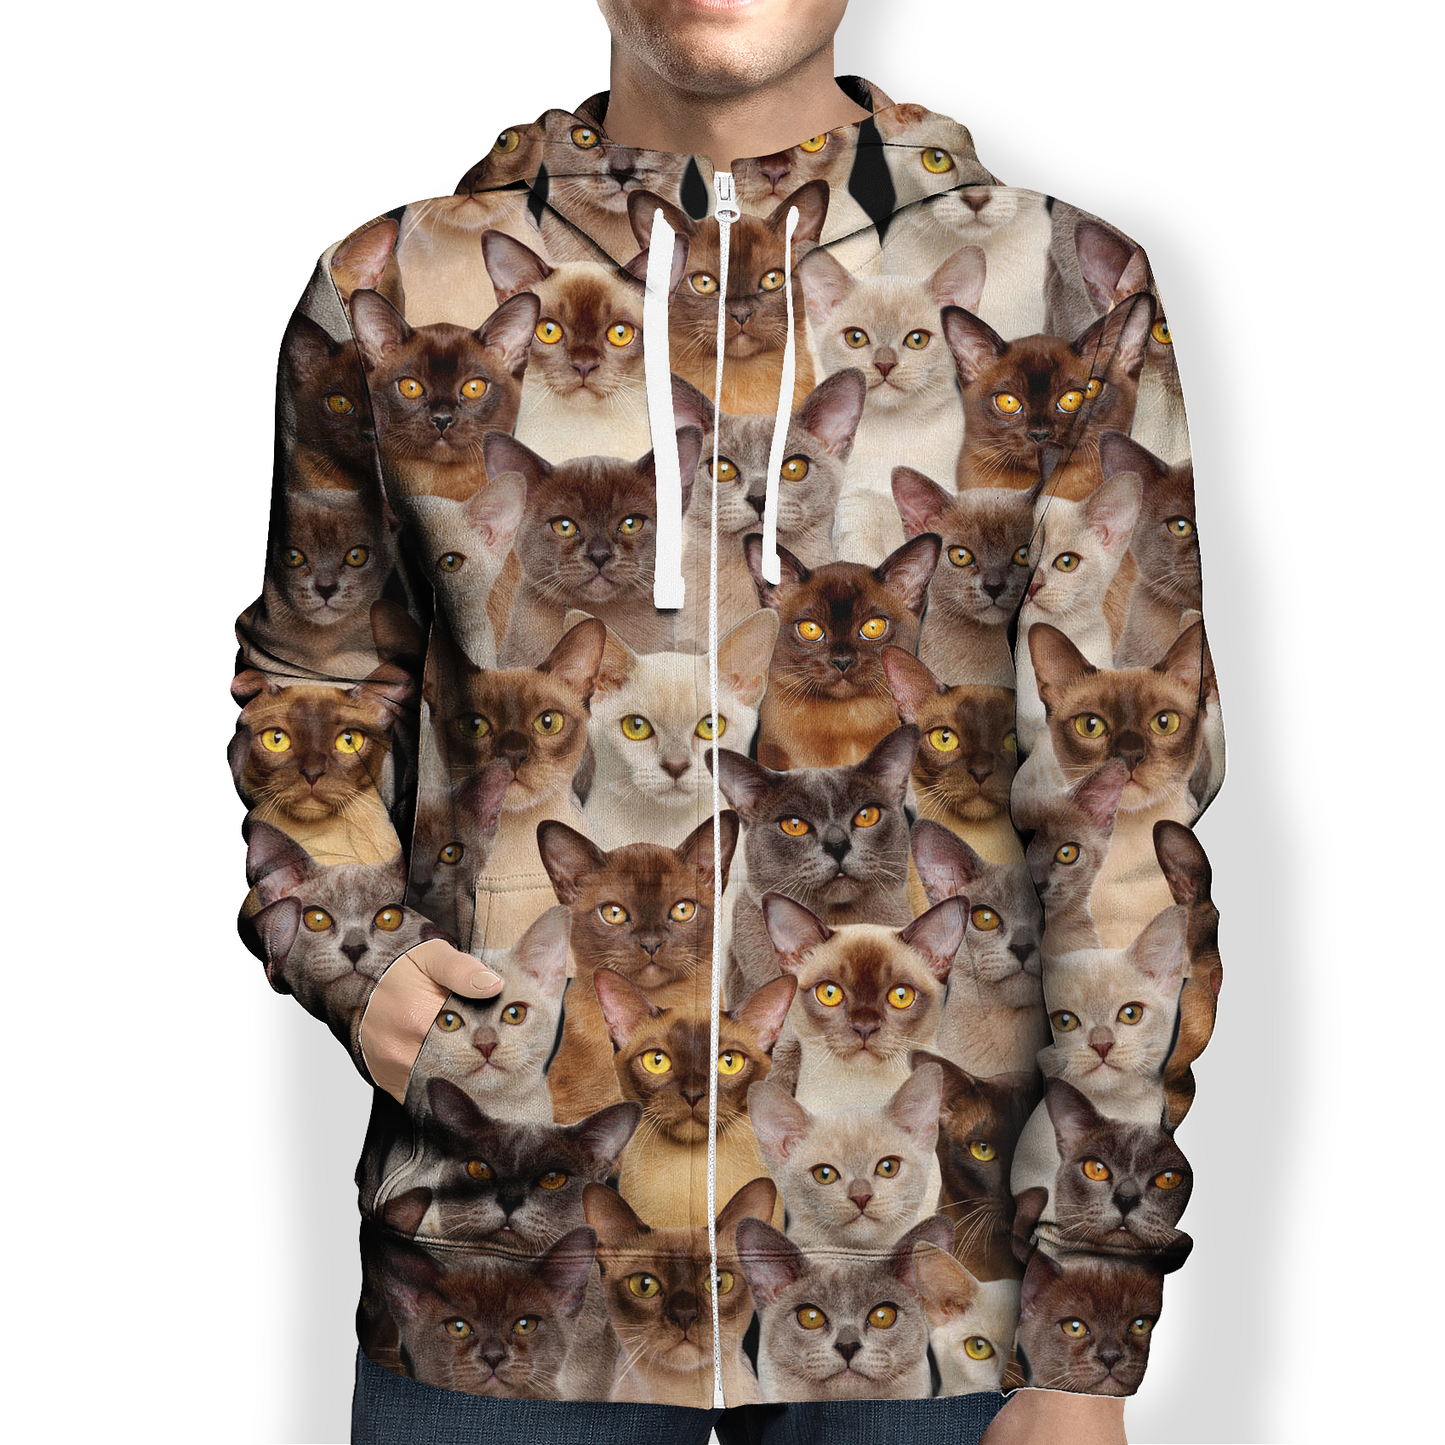 You Will Have A Bunch Of Burmese Cats - Hoodie V1